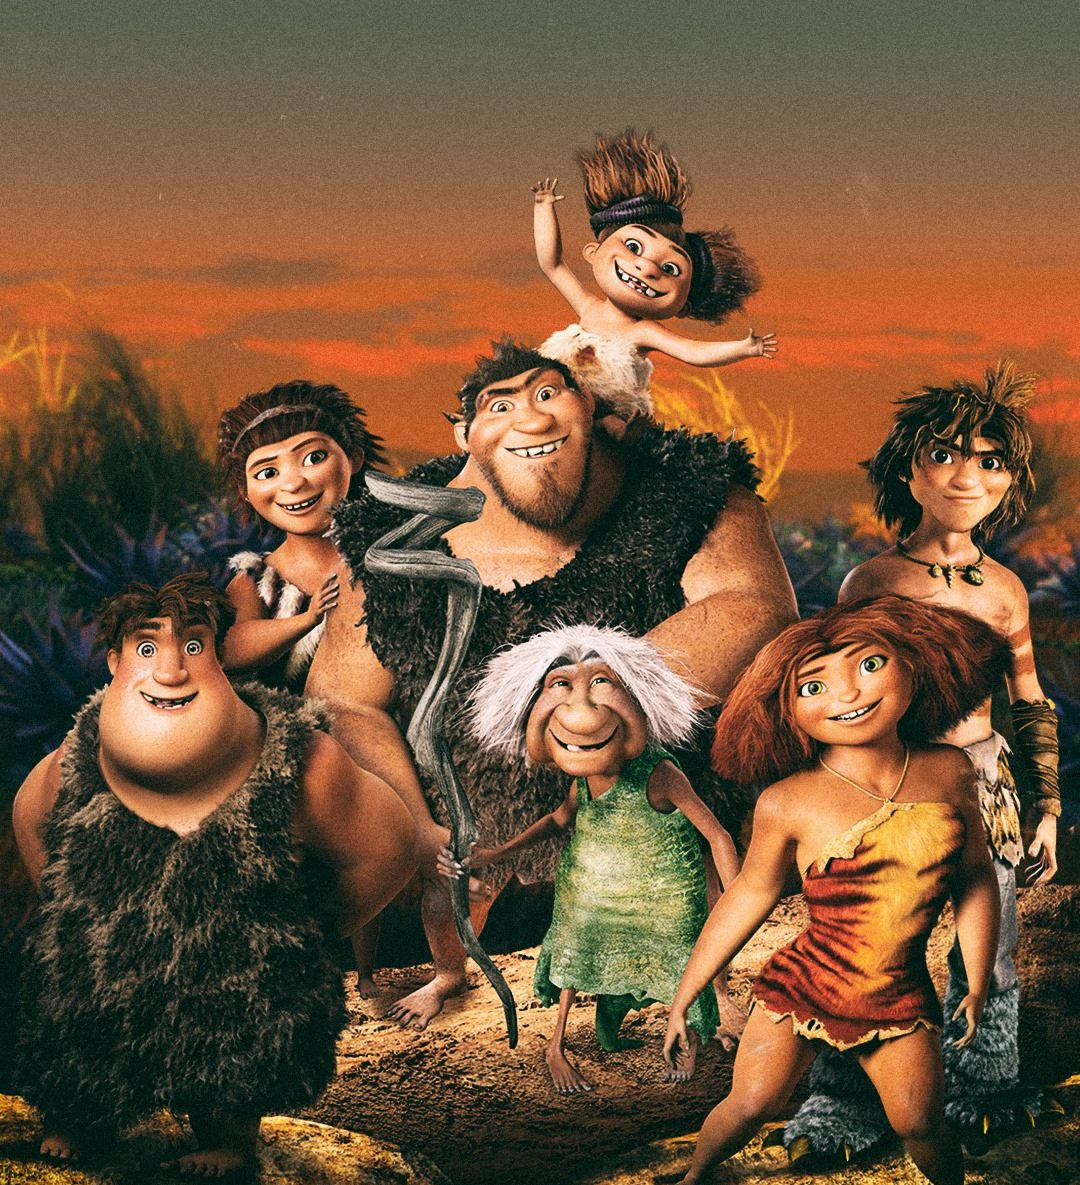 "The Close-knit Prehistoric Family - The Croods" Wallpaper